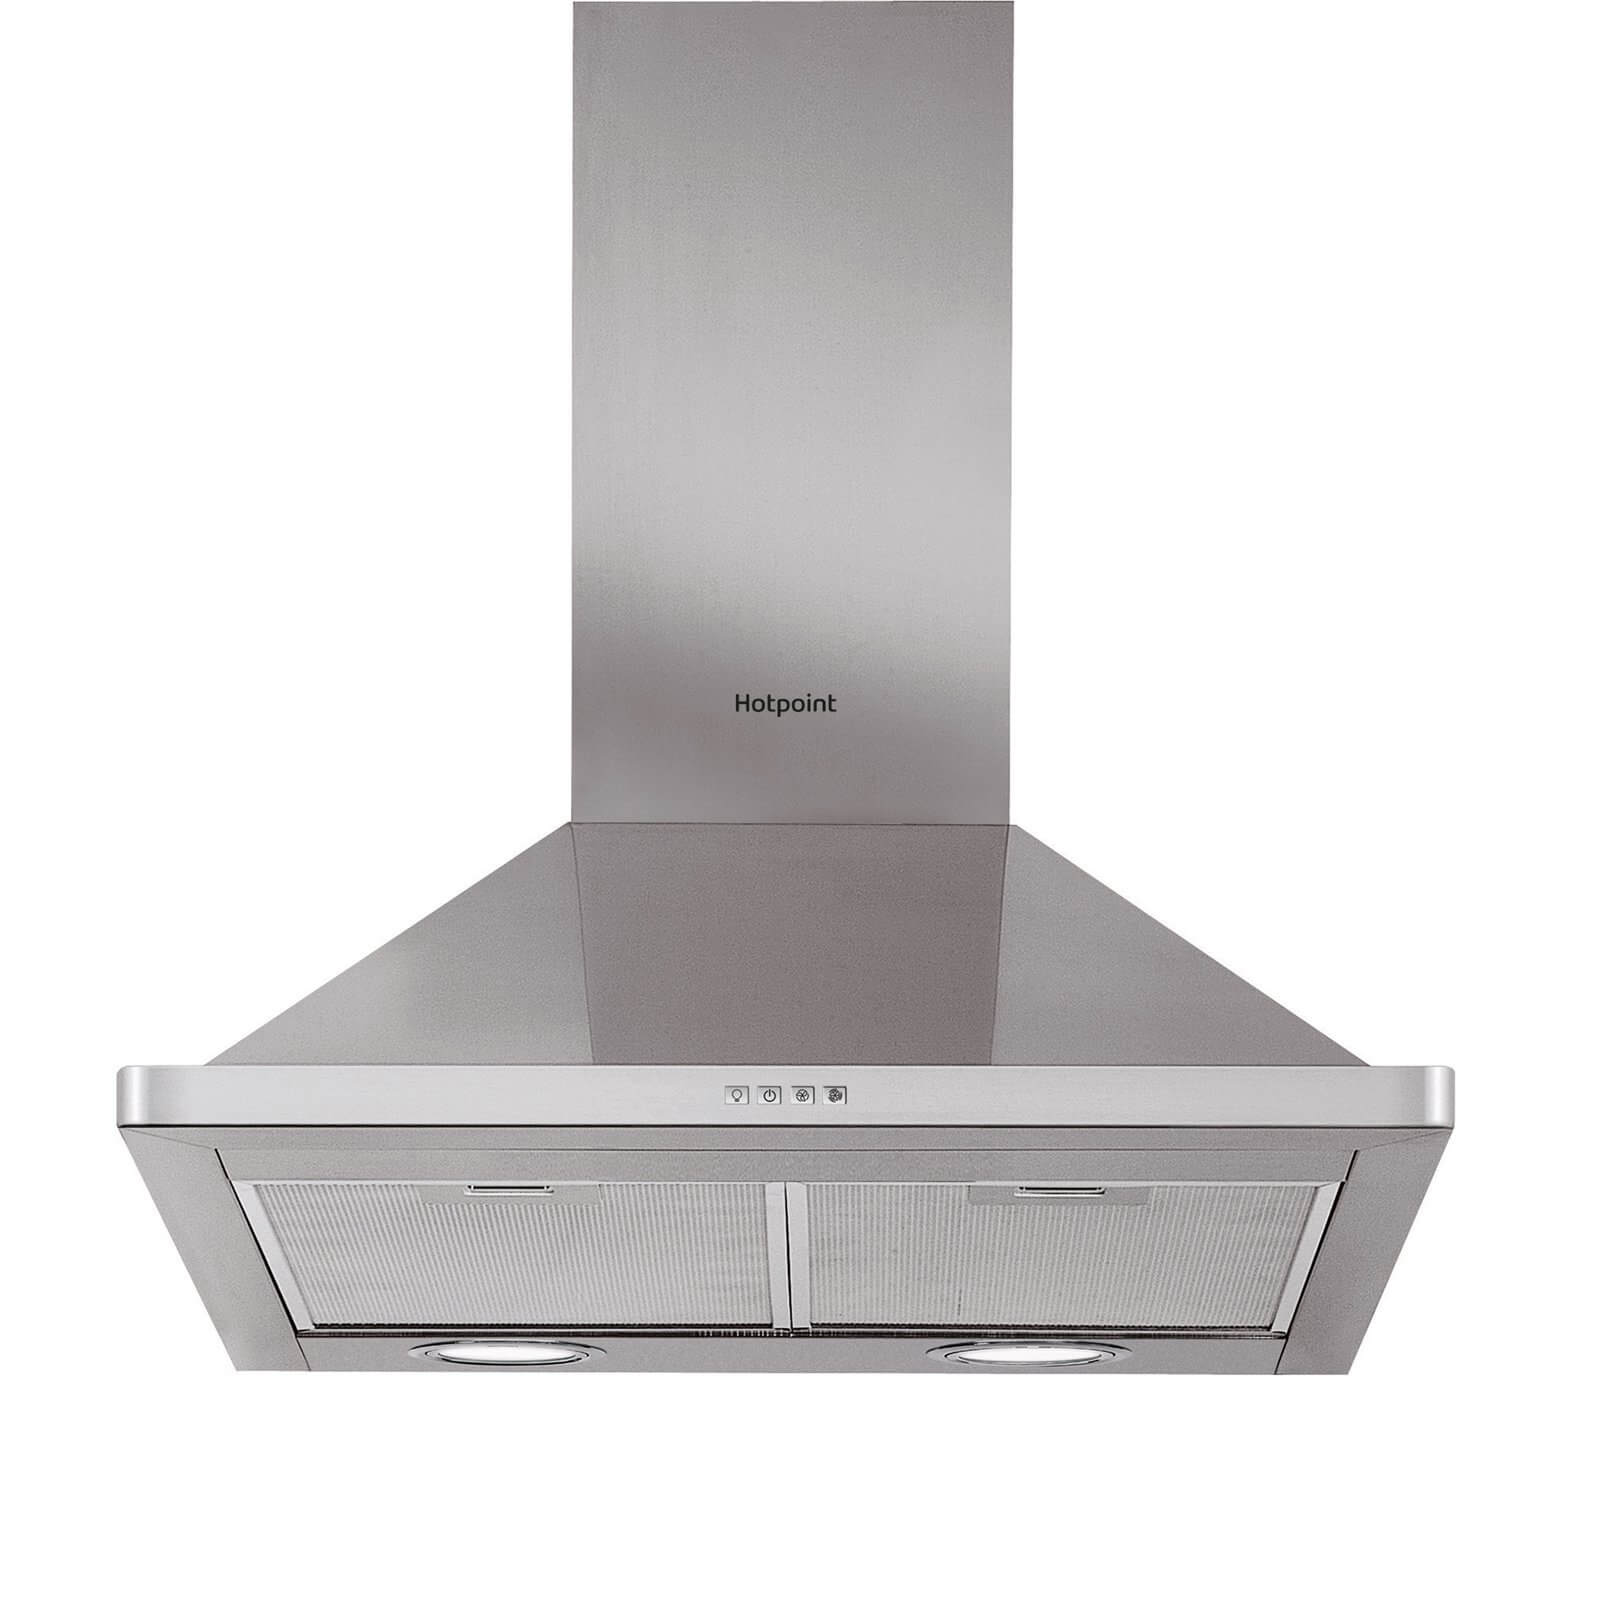 Hotpoint PHPN6.5 FLMX Chimney Cooker Hood - Stainless Steel